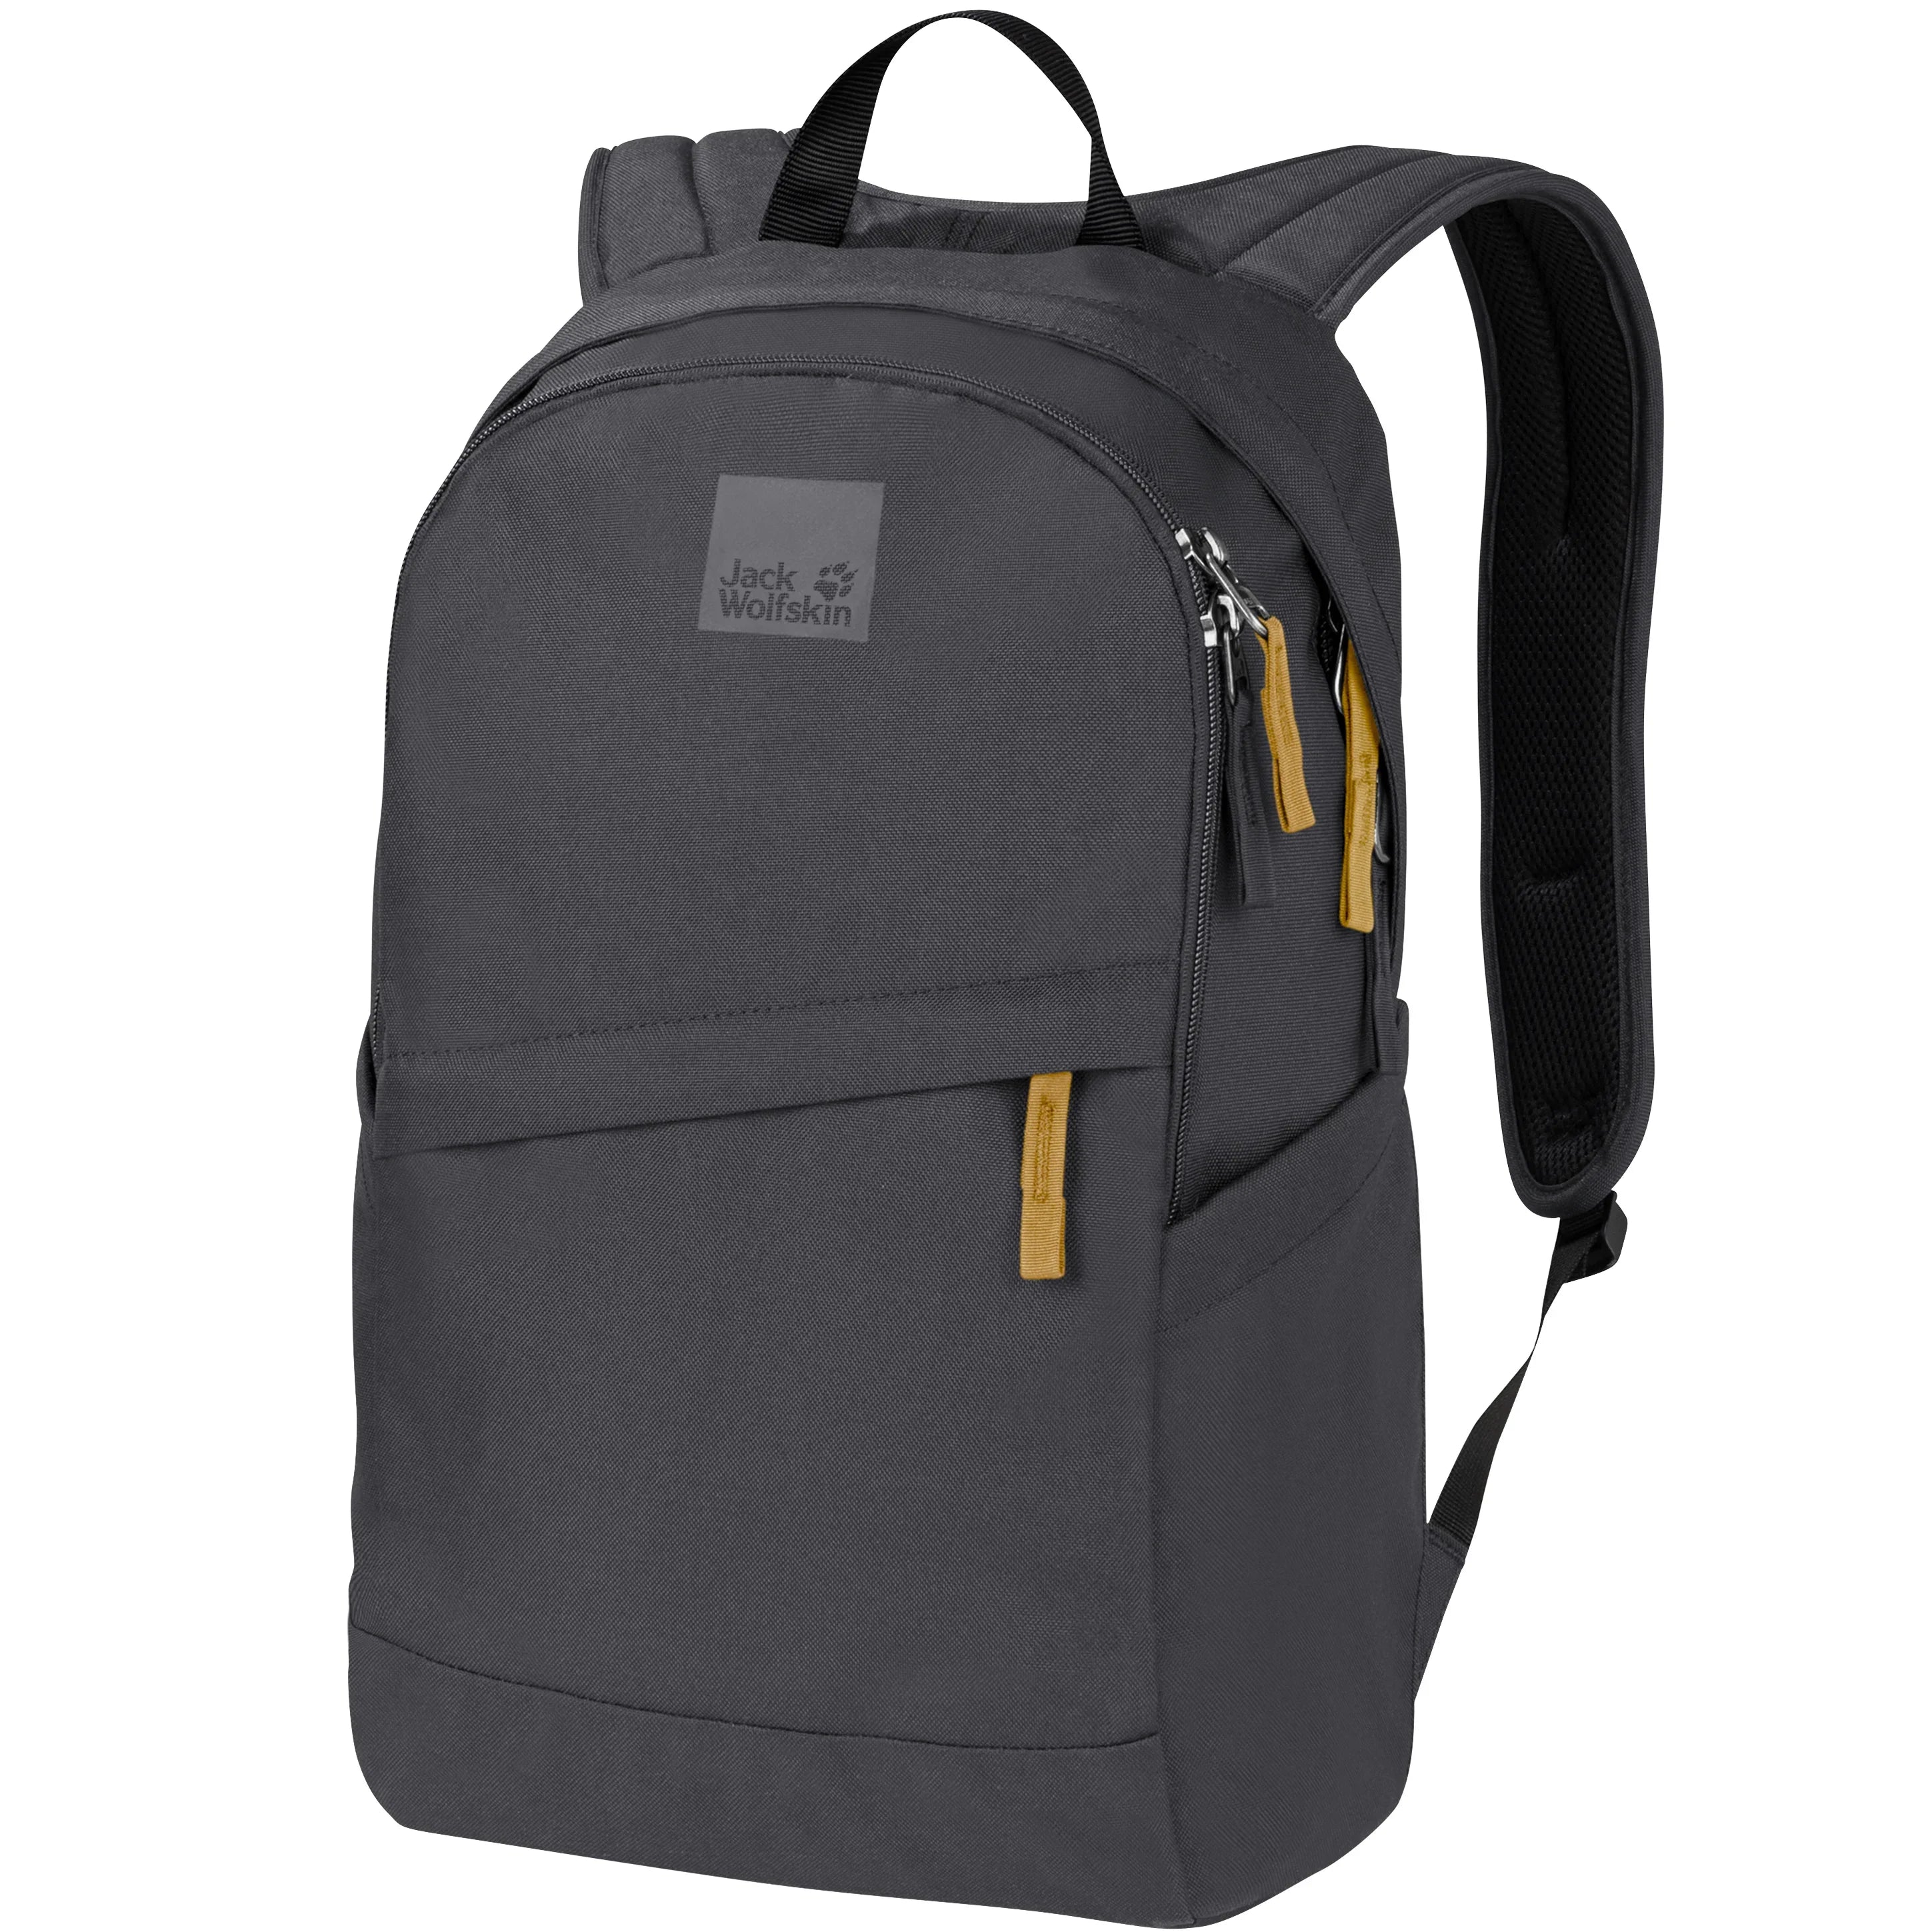 Jack Wolfskin daypacks & bags - perfect companions for everyday life and  travel